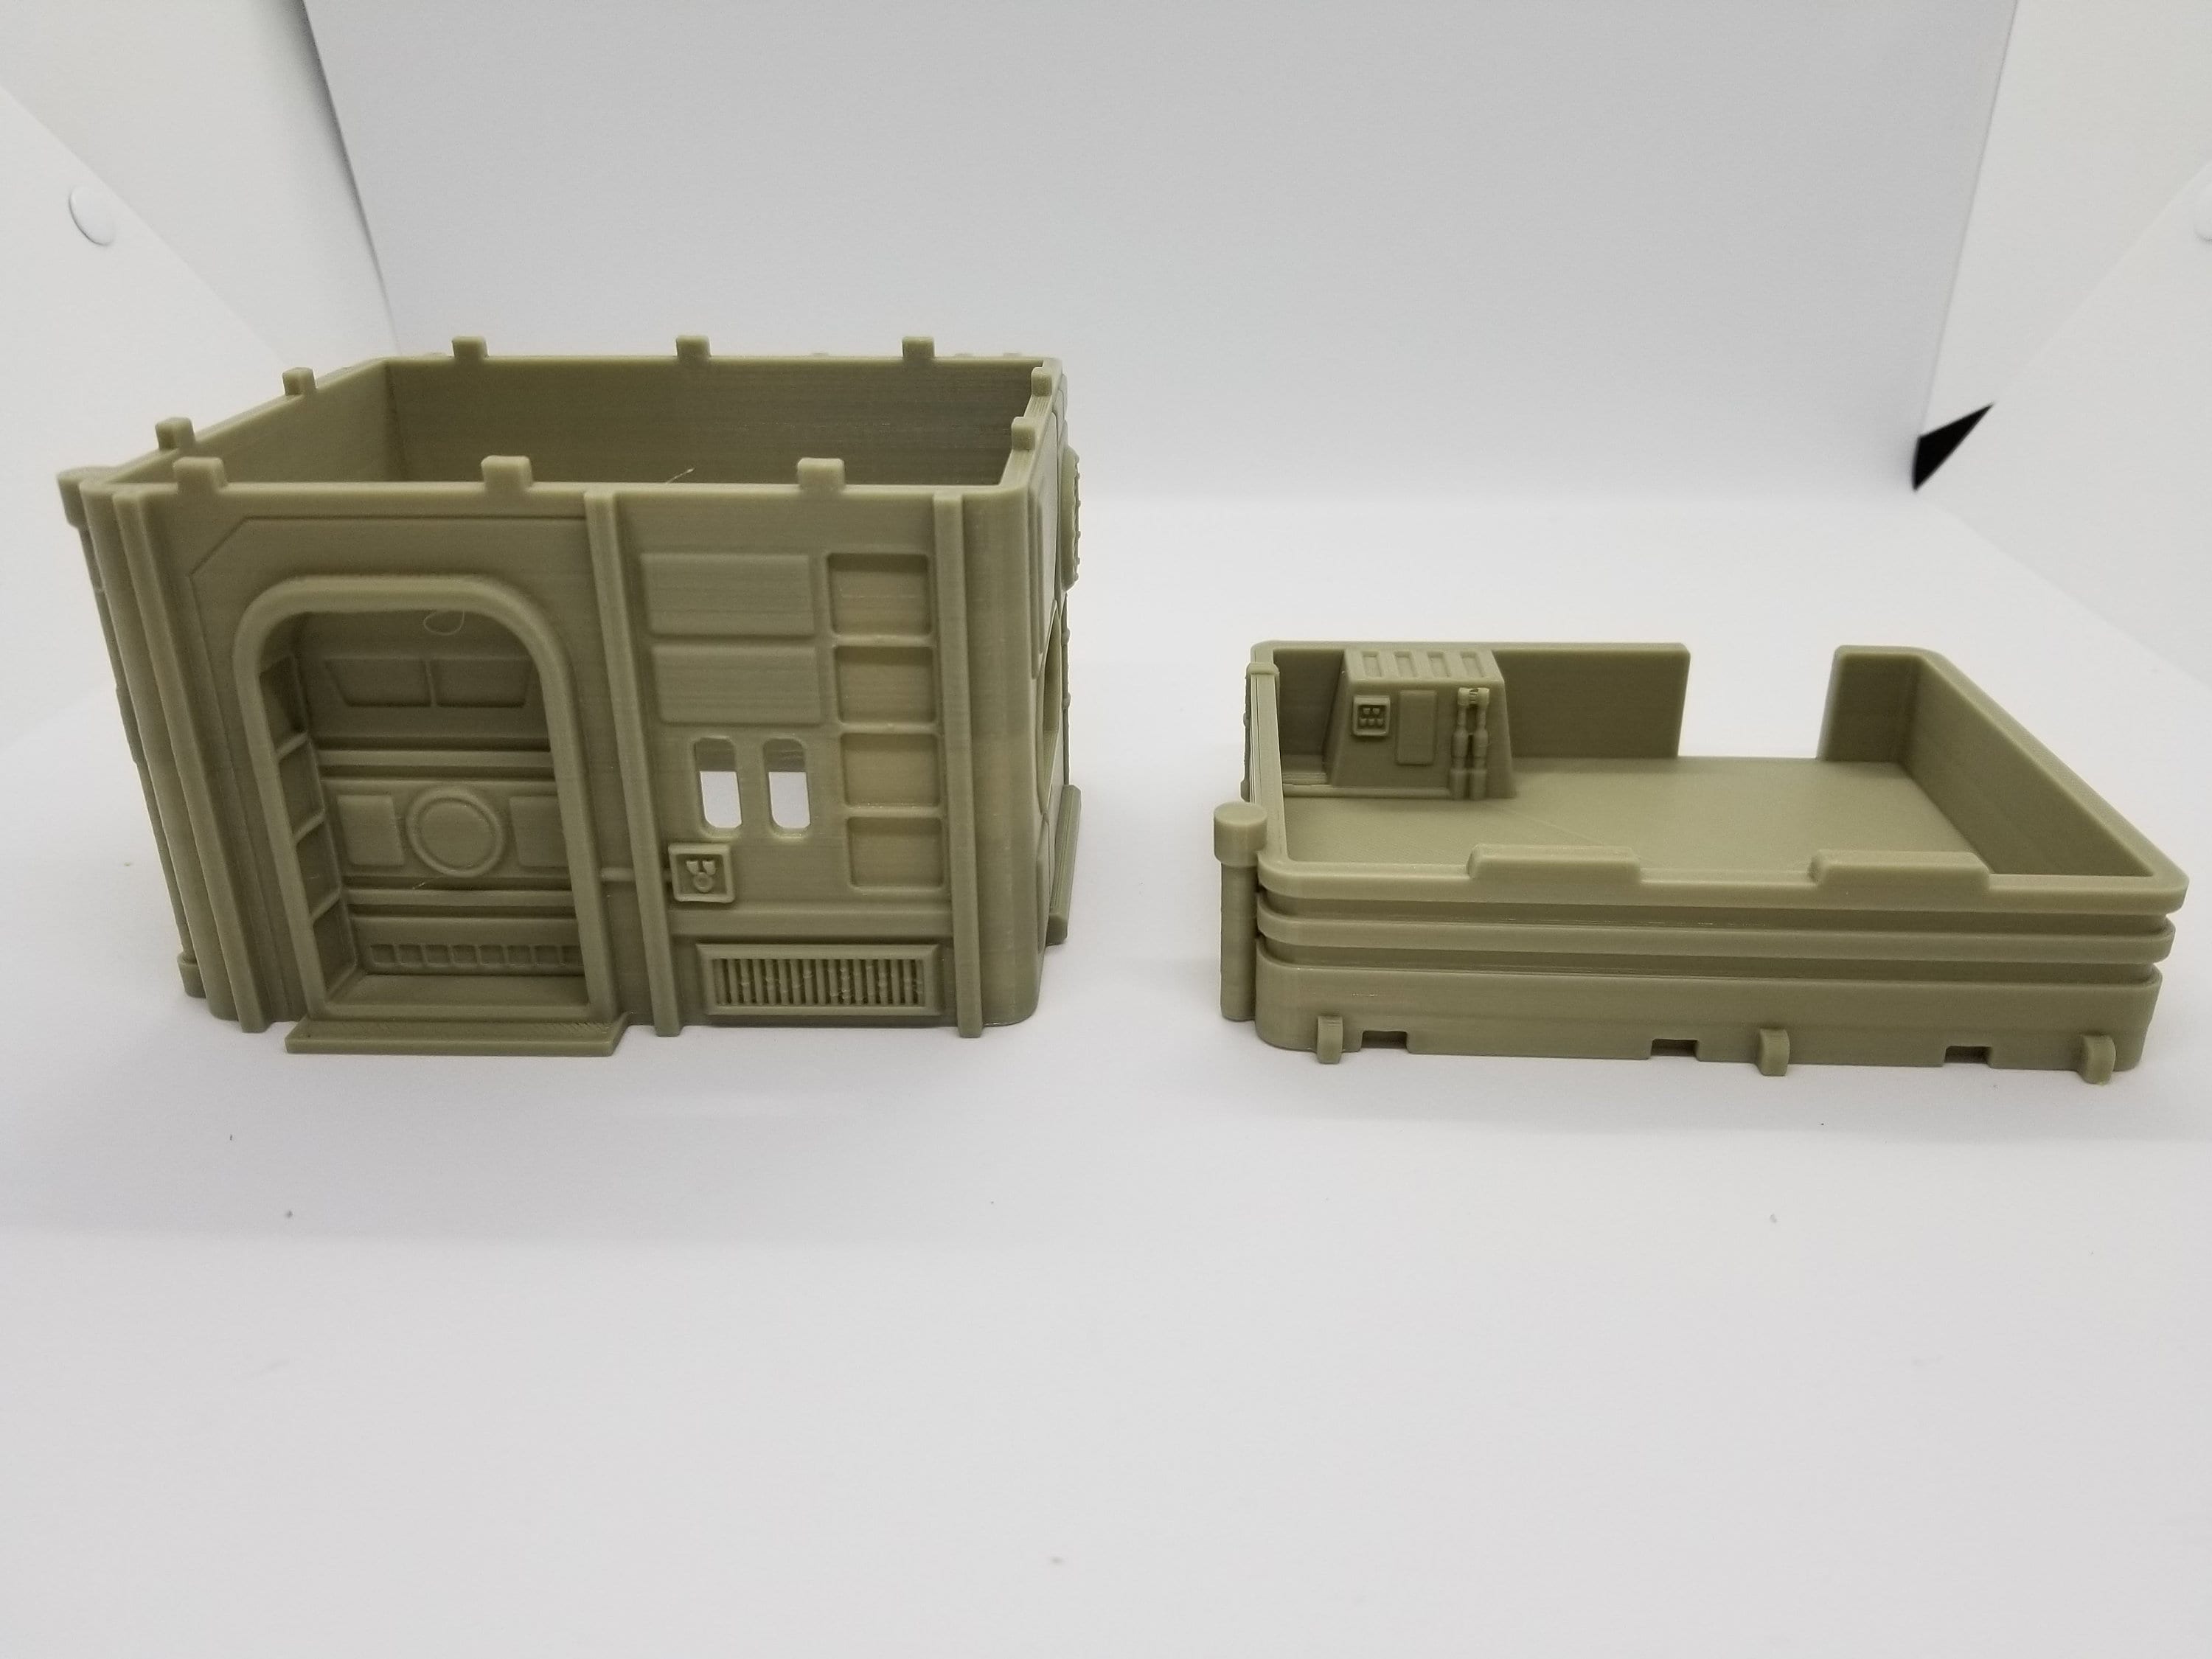 3d Printed Legion Compatible Small City House 1 / Corvus Games Terrain Licensed Printer / Print to Order